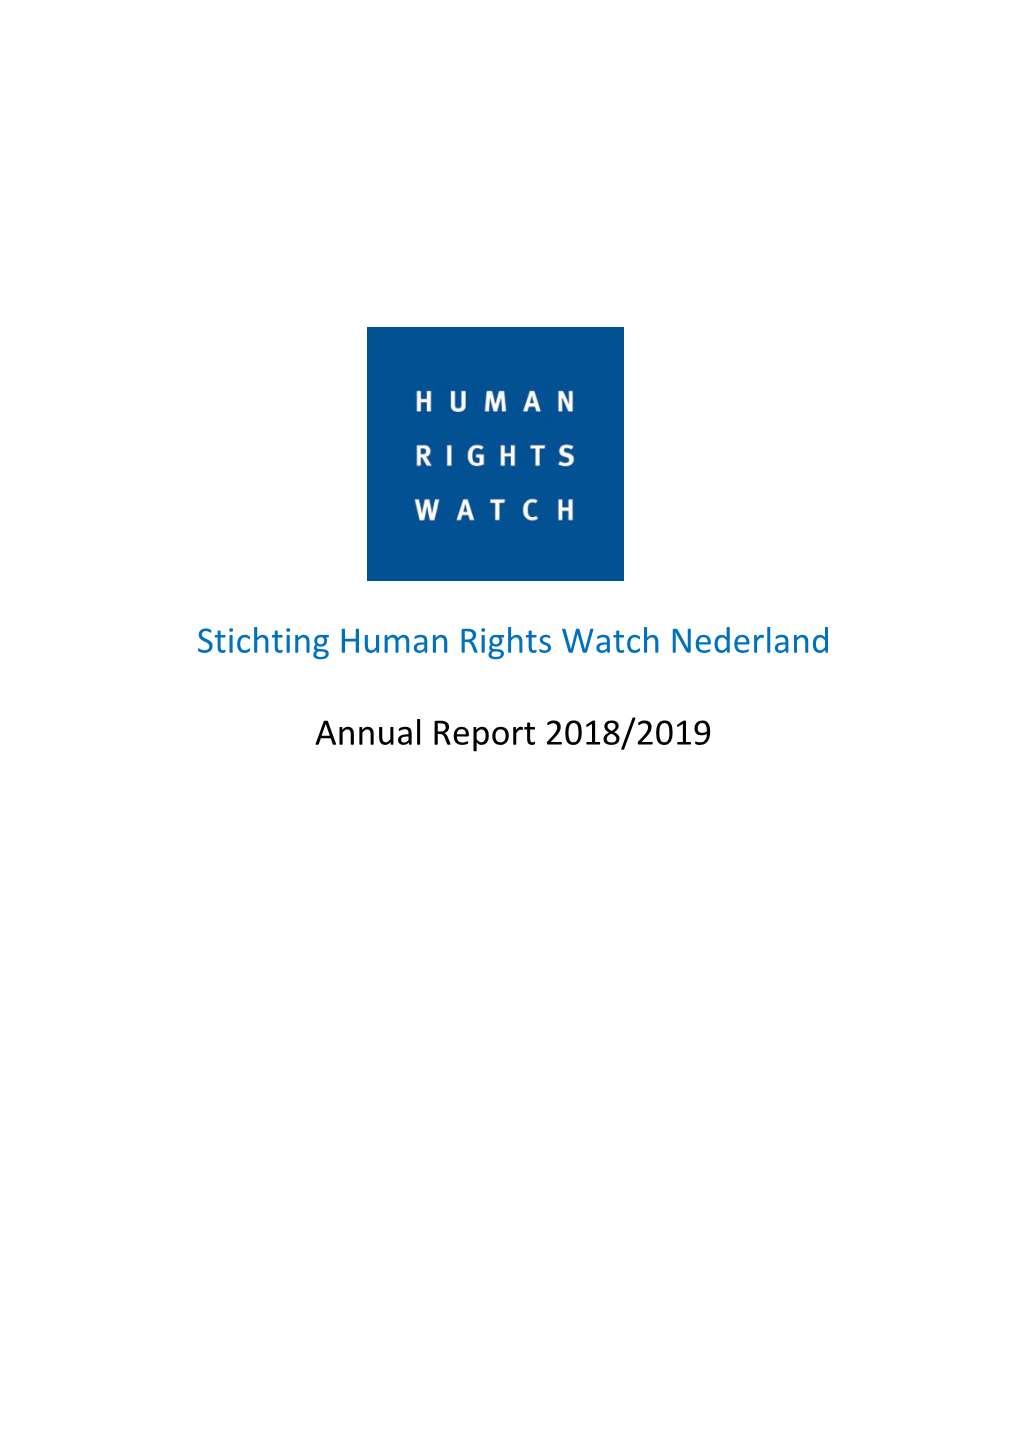 Stichting Human Rights Watch Nederland Annual Report 2018/2019